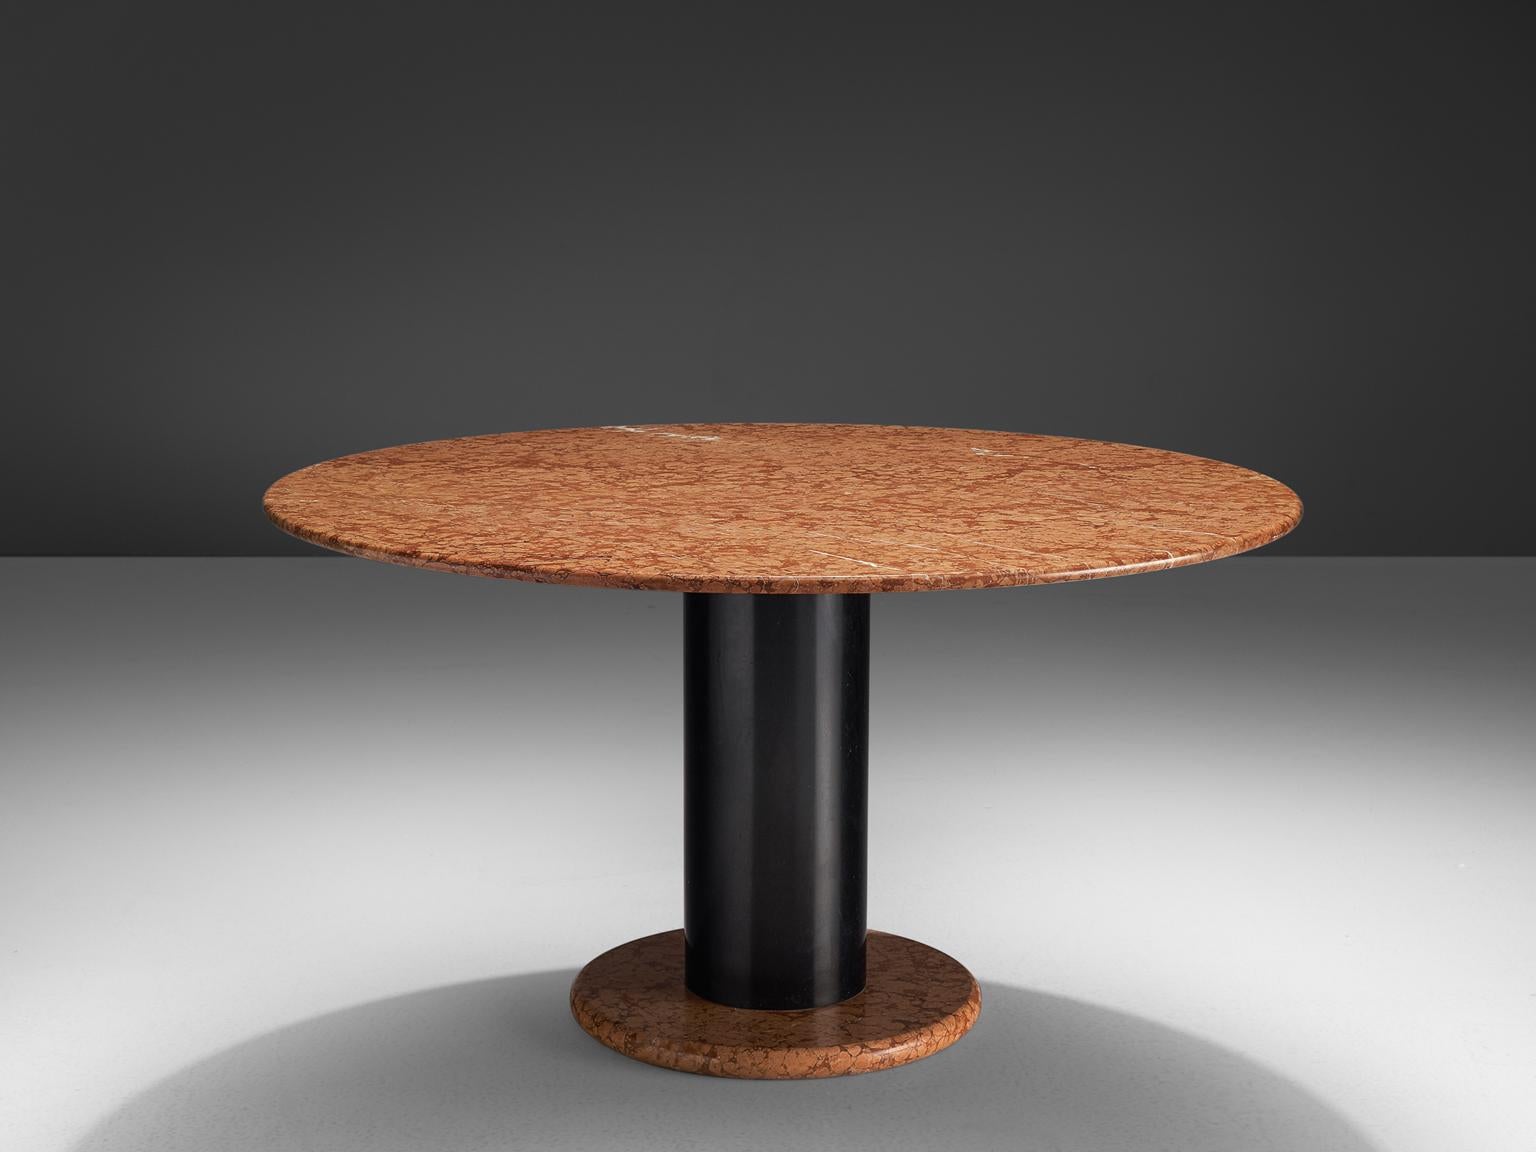 Ettore Sottsass for Poltronova, pedestal table, in red marble and metal, Italy, 1965. 

Round pedestal table by Italian designer Ettore Sottsass. A orange-pink round base with black metal cylindrical column. The round top is executed in beautiful